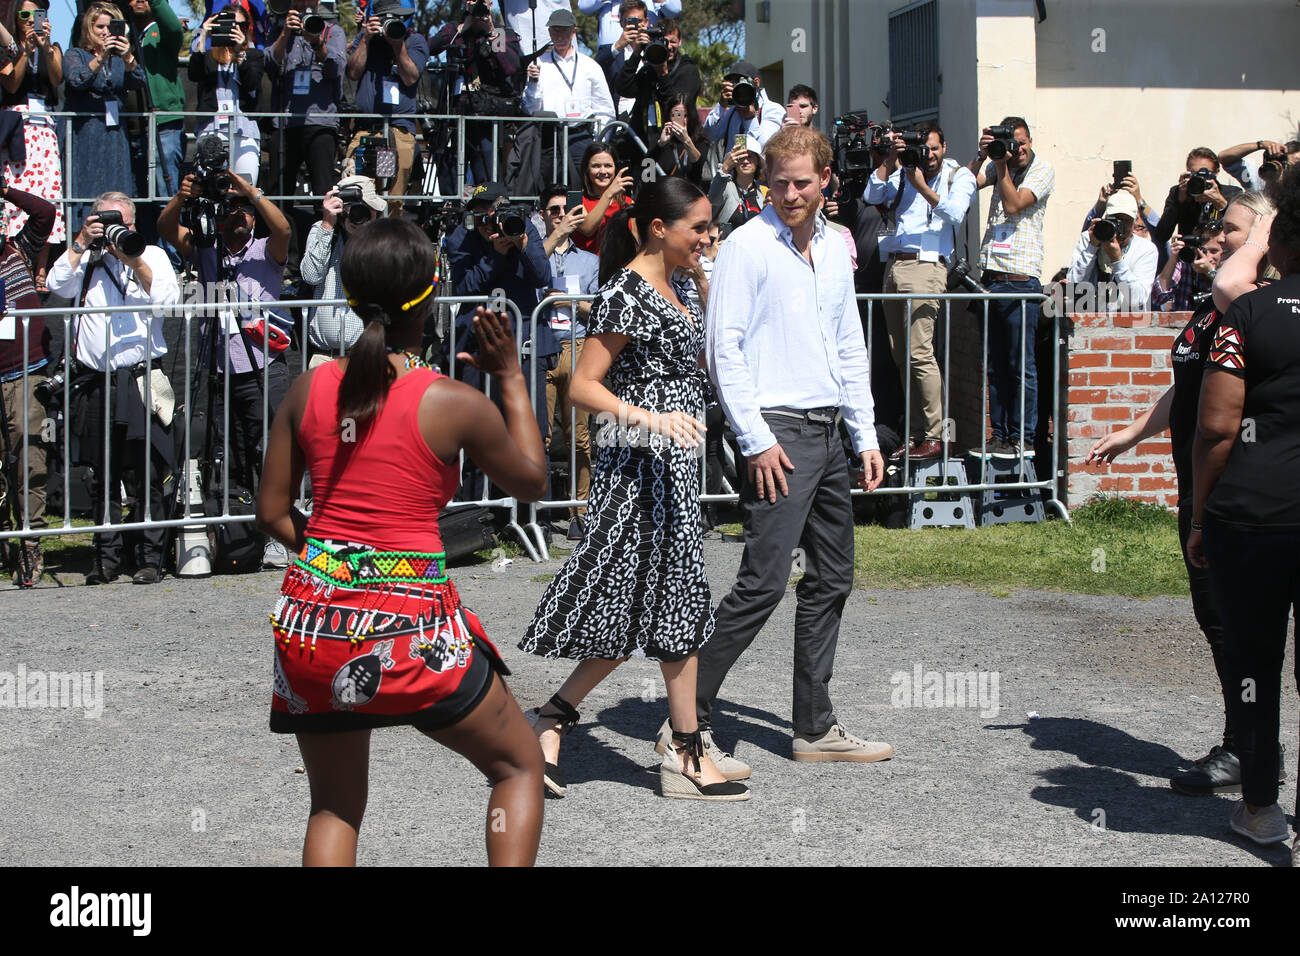 The Duke and Duchess of Sussex begin their visit to South Africa inthe Nyanga Township, Cape Town, visiting a workshop that teaches children about their rights, self-awareness and safety and which provides self-defence classes and female empowerment training to young girls in the community. Stock Photo